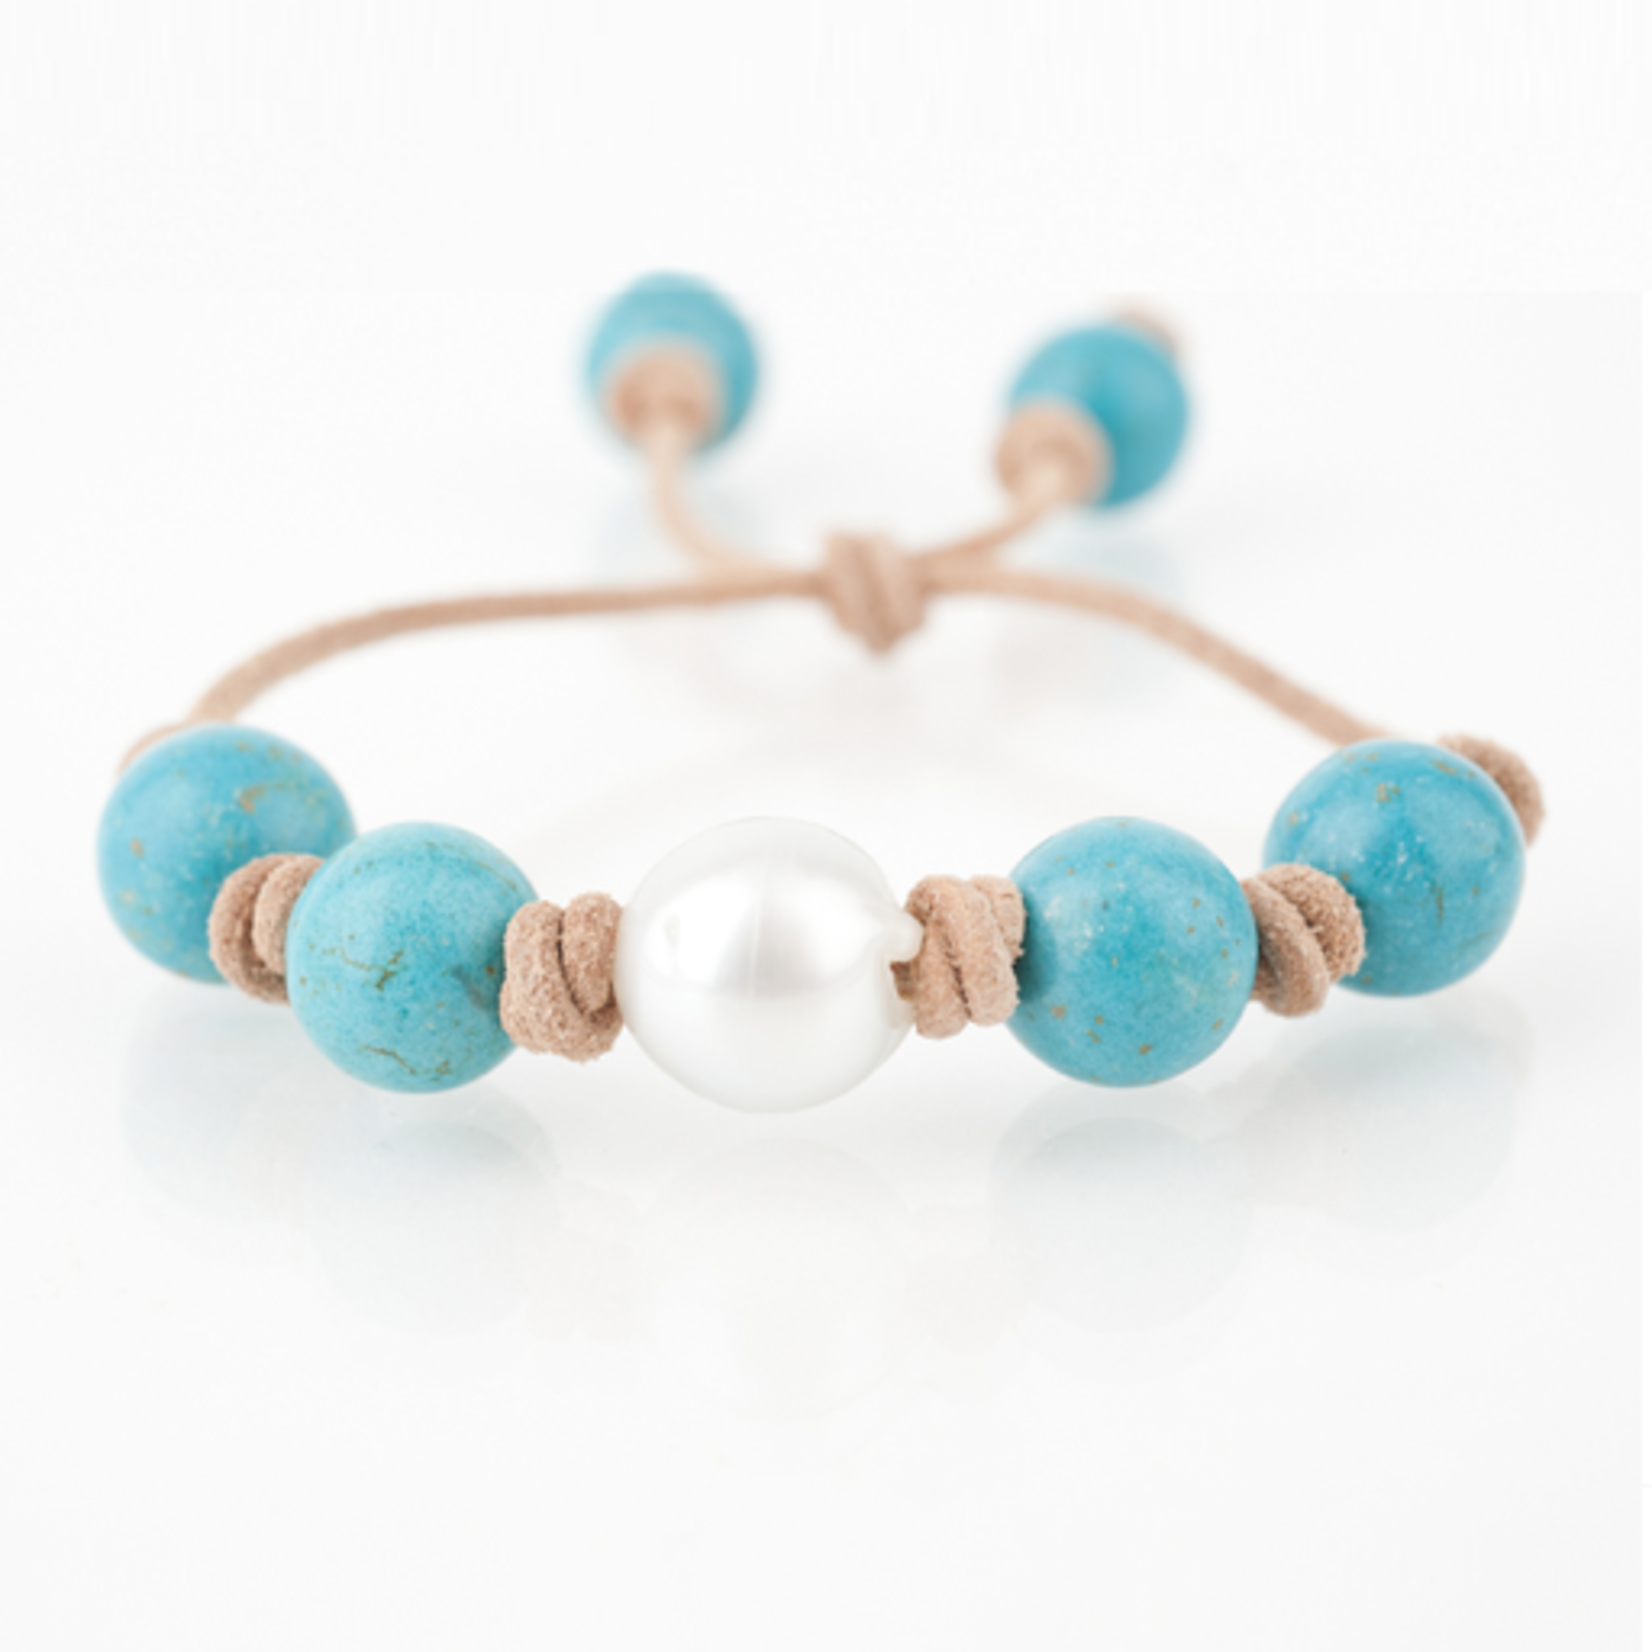 Mina Danielle Turquoise with White South Sea Pearl knotted on Tan Leather Cord. Adjustable sliding closure.